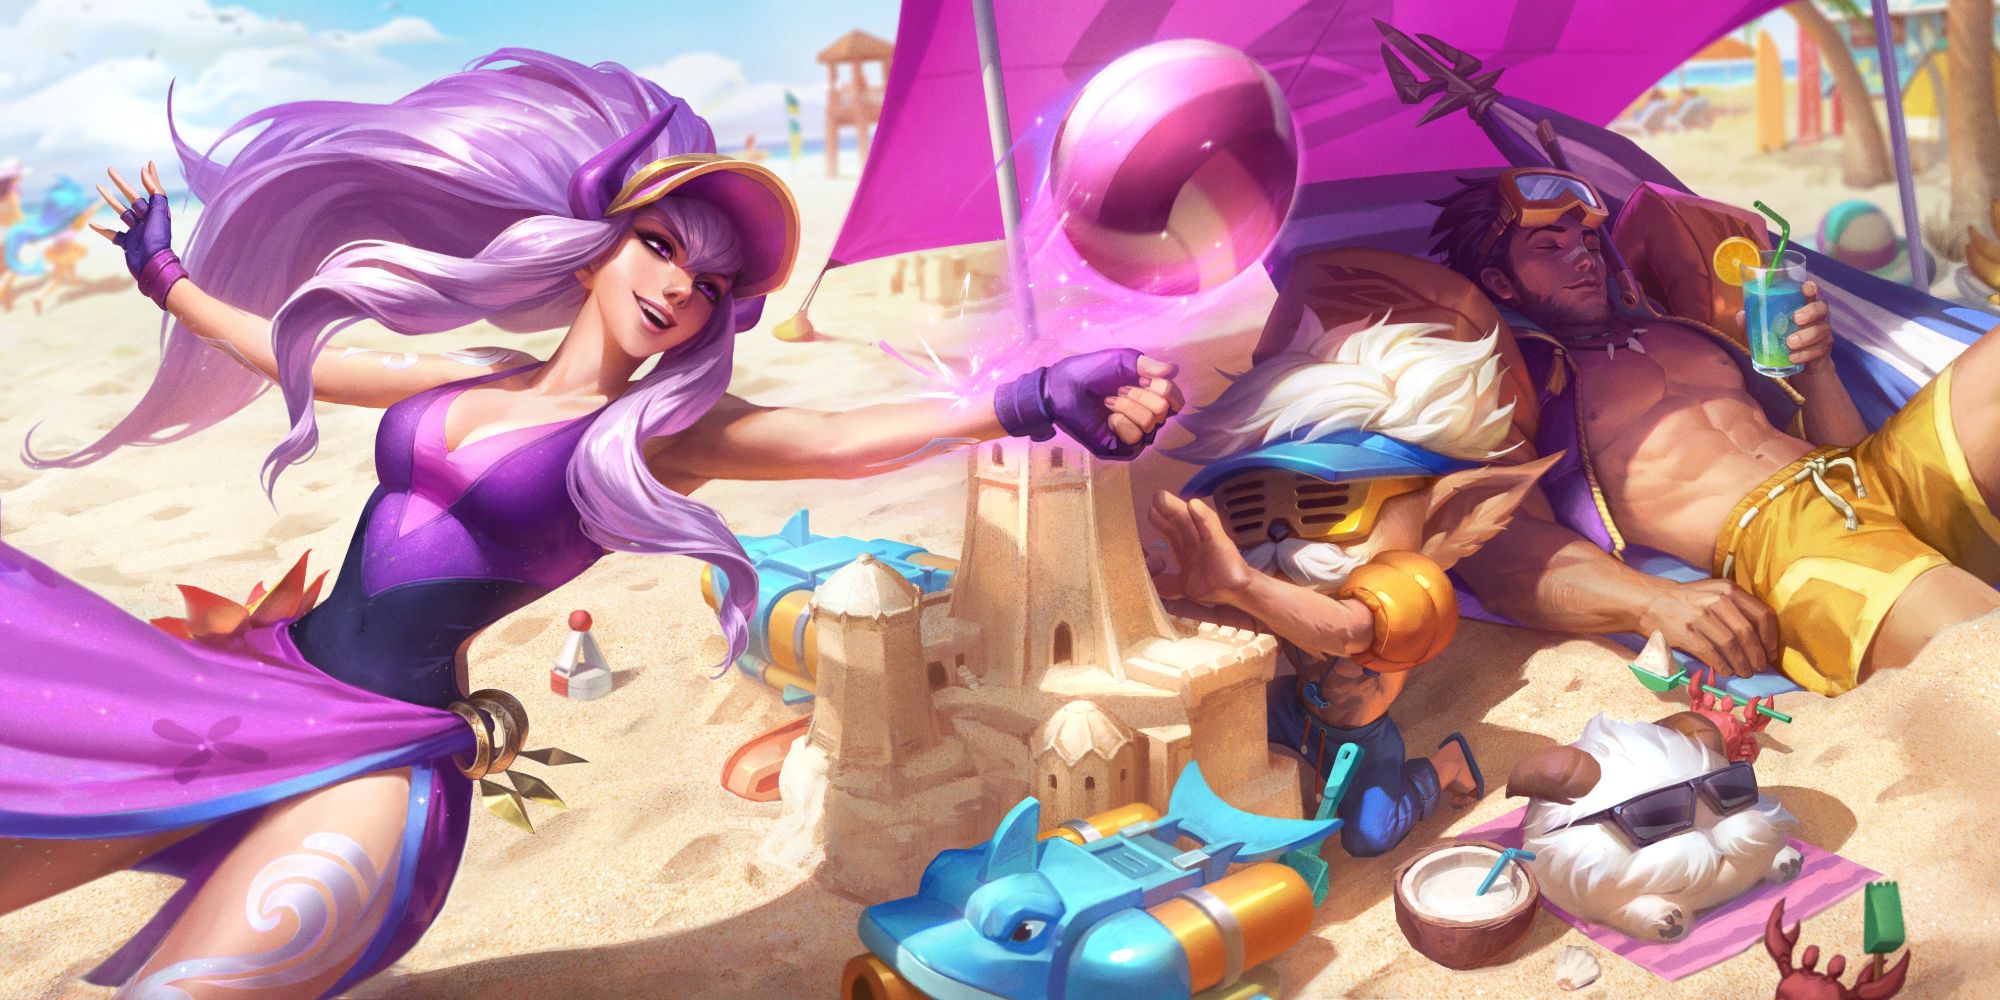 League of Legends characters relaxing on a beach